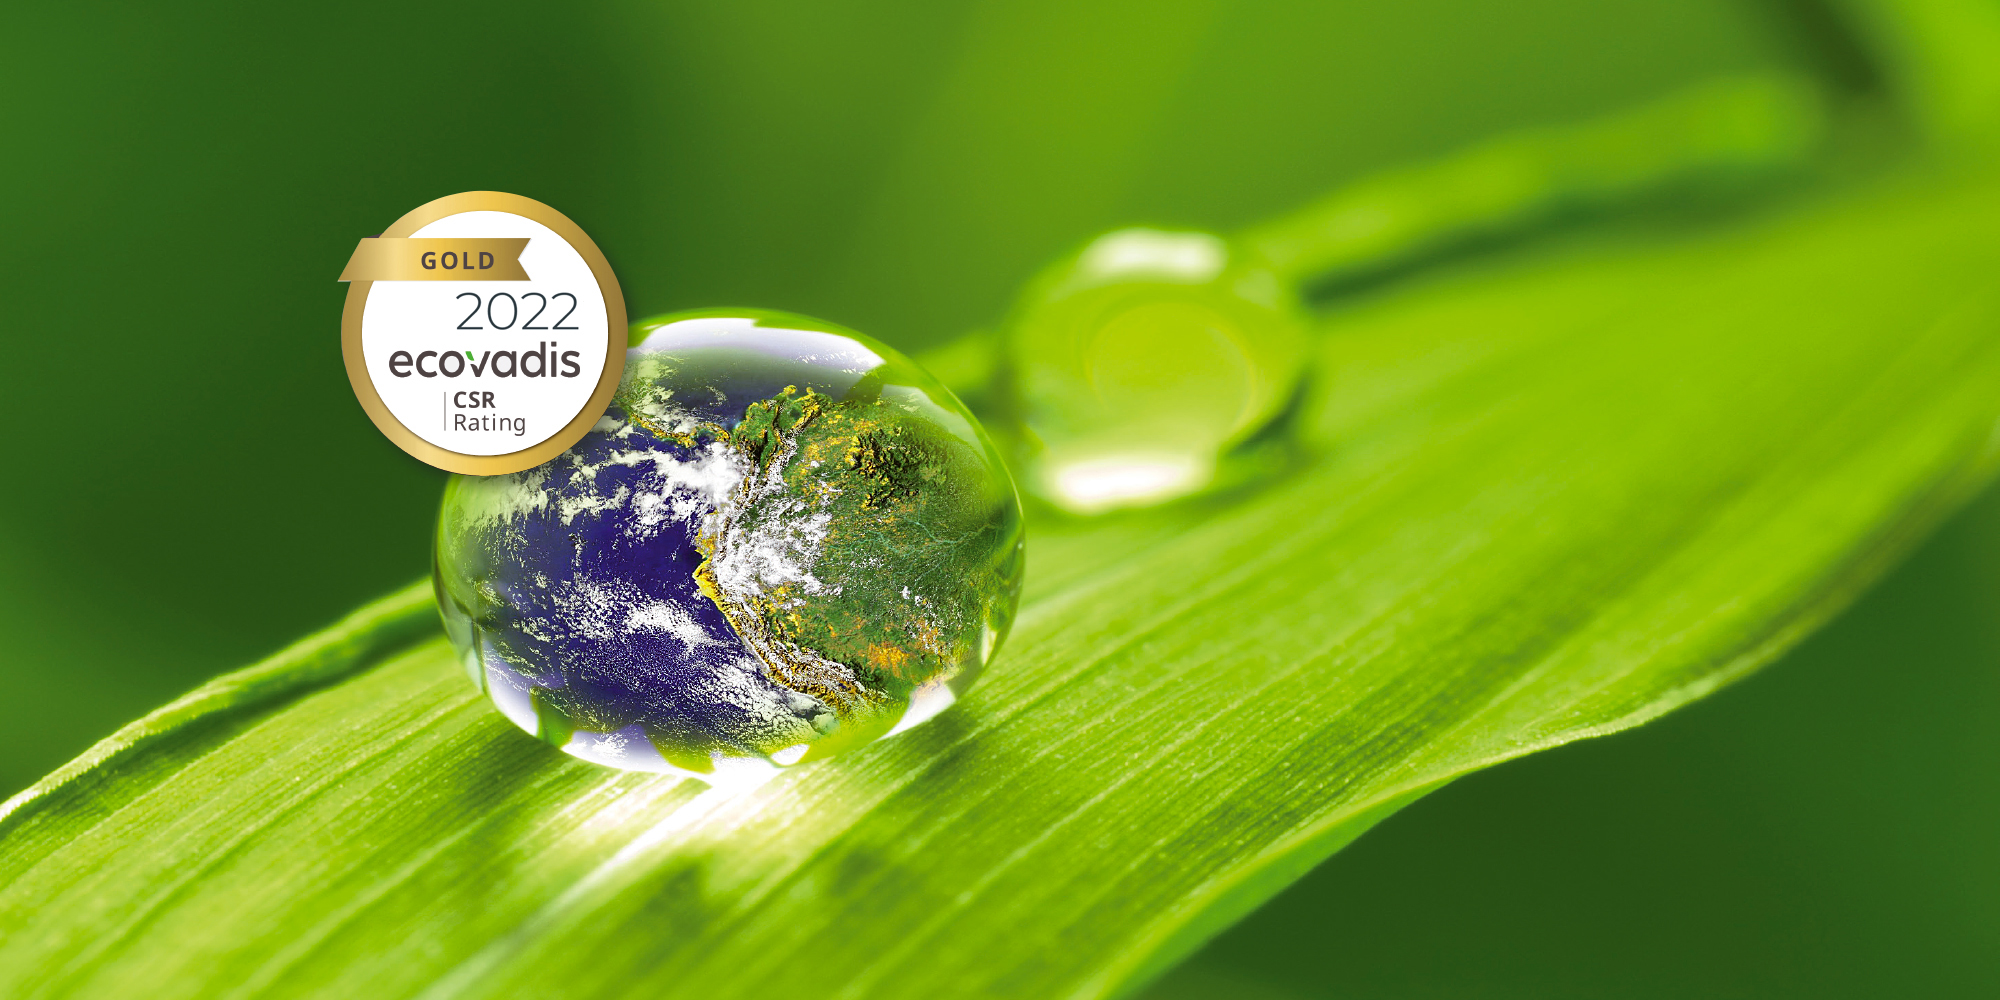 ADISCO receives the Ecovadis gold medal for the third consecutive year.